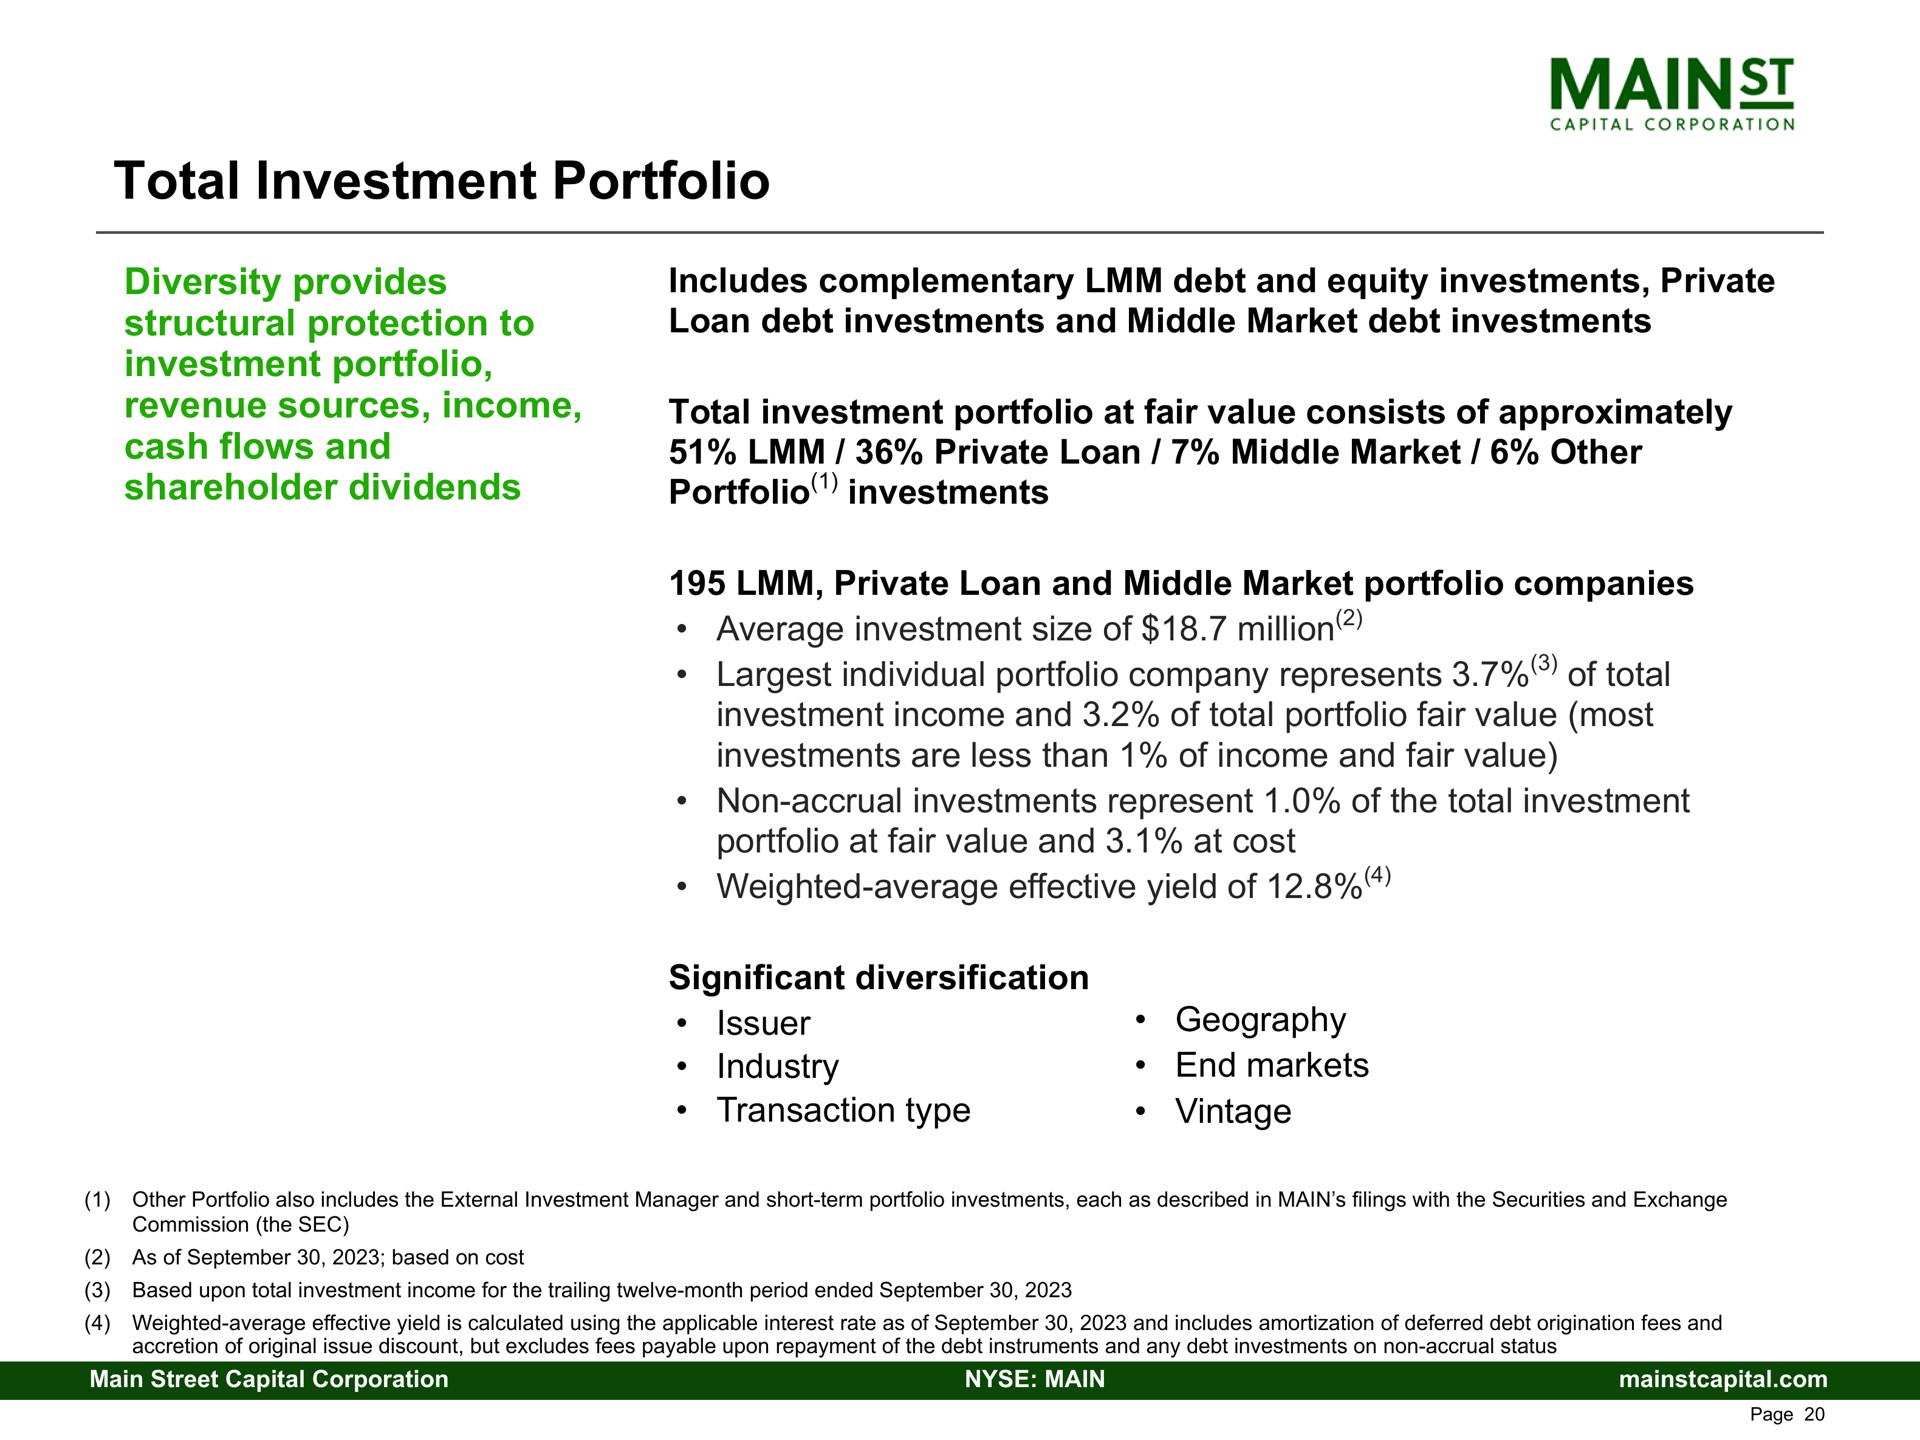 total investment portfolio individual company represents of weighted average effective yield of | Main Street Capital